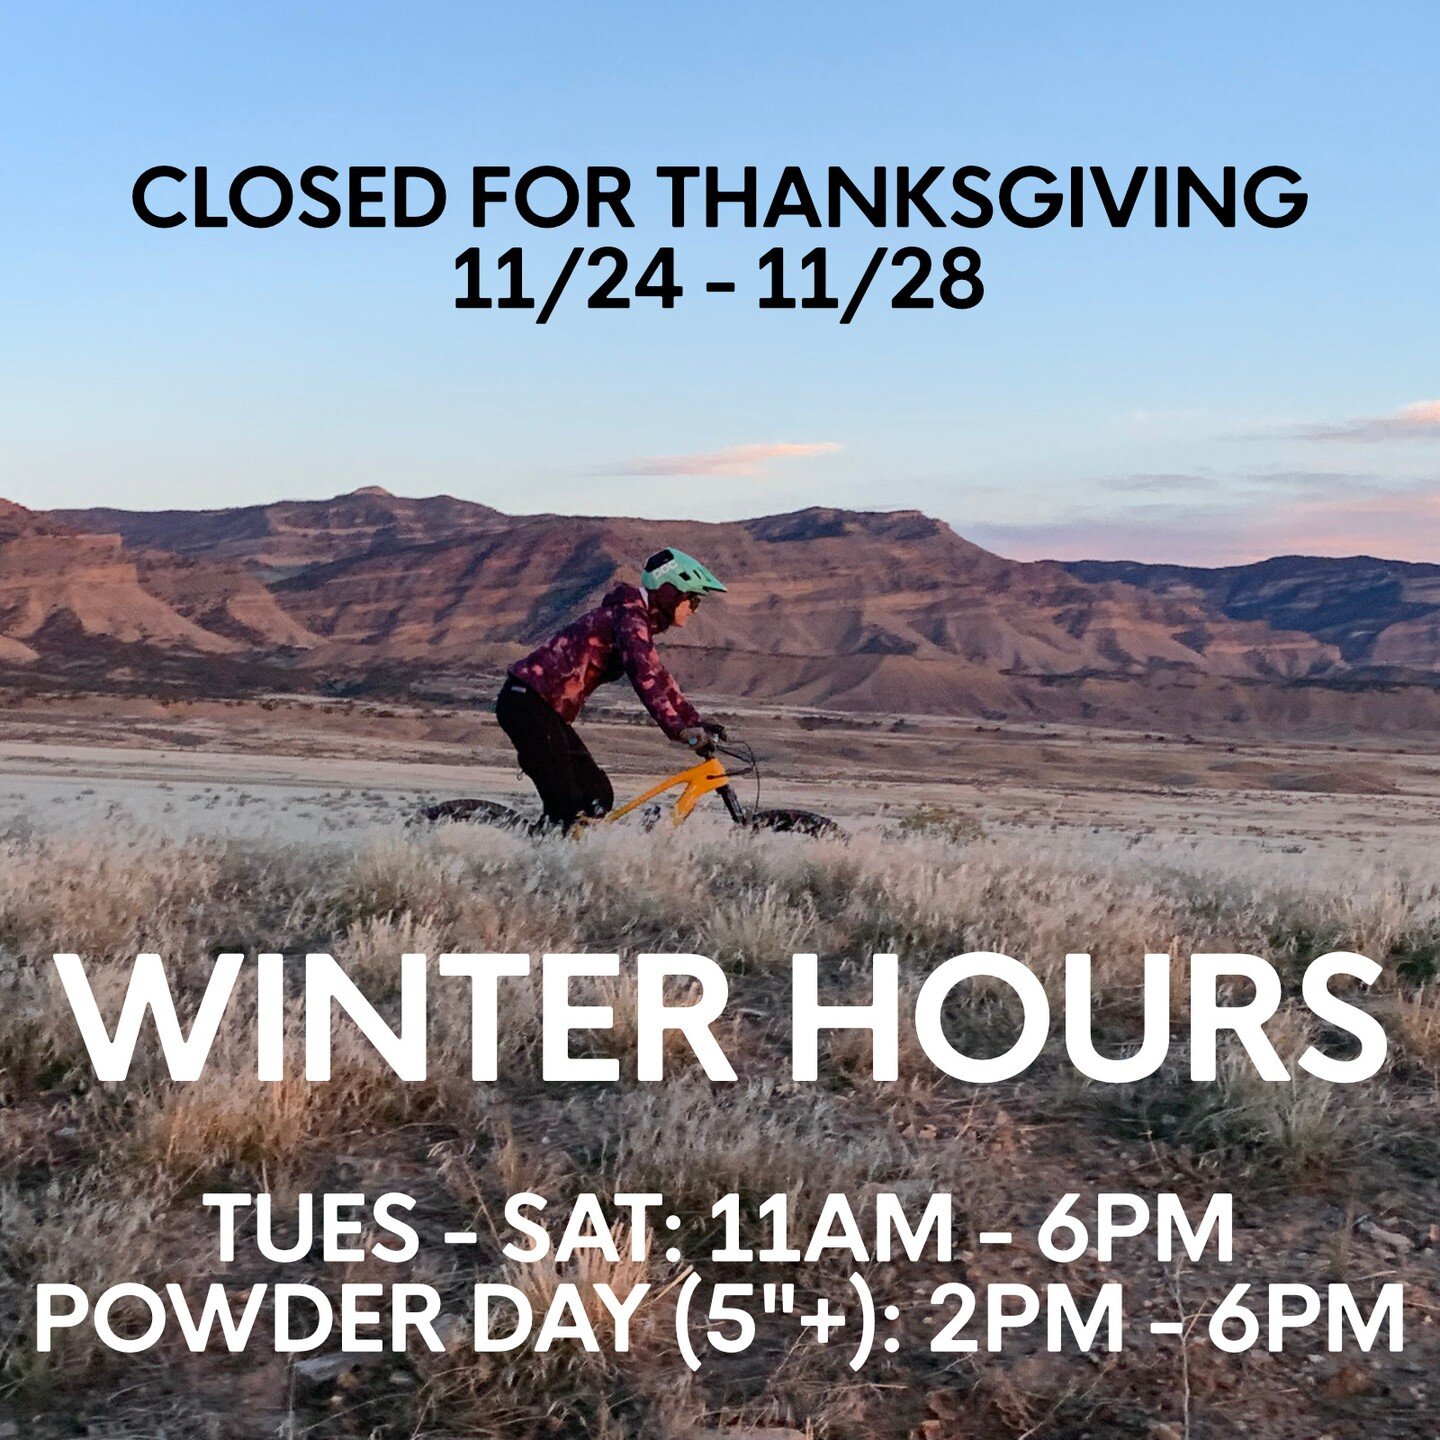 Just a little update on our hours for the winter...
We will be CLOSED Thursday, 11/24 through Monday, 11/28 for Thanksgiving. Back open on Tuesday, 11/29 with winter hours:
Tuesday-Saturday 11am-6pm
Open late on powder days (5&quot;+ of new snow) at 